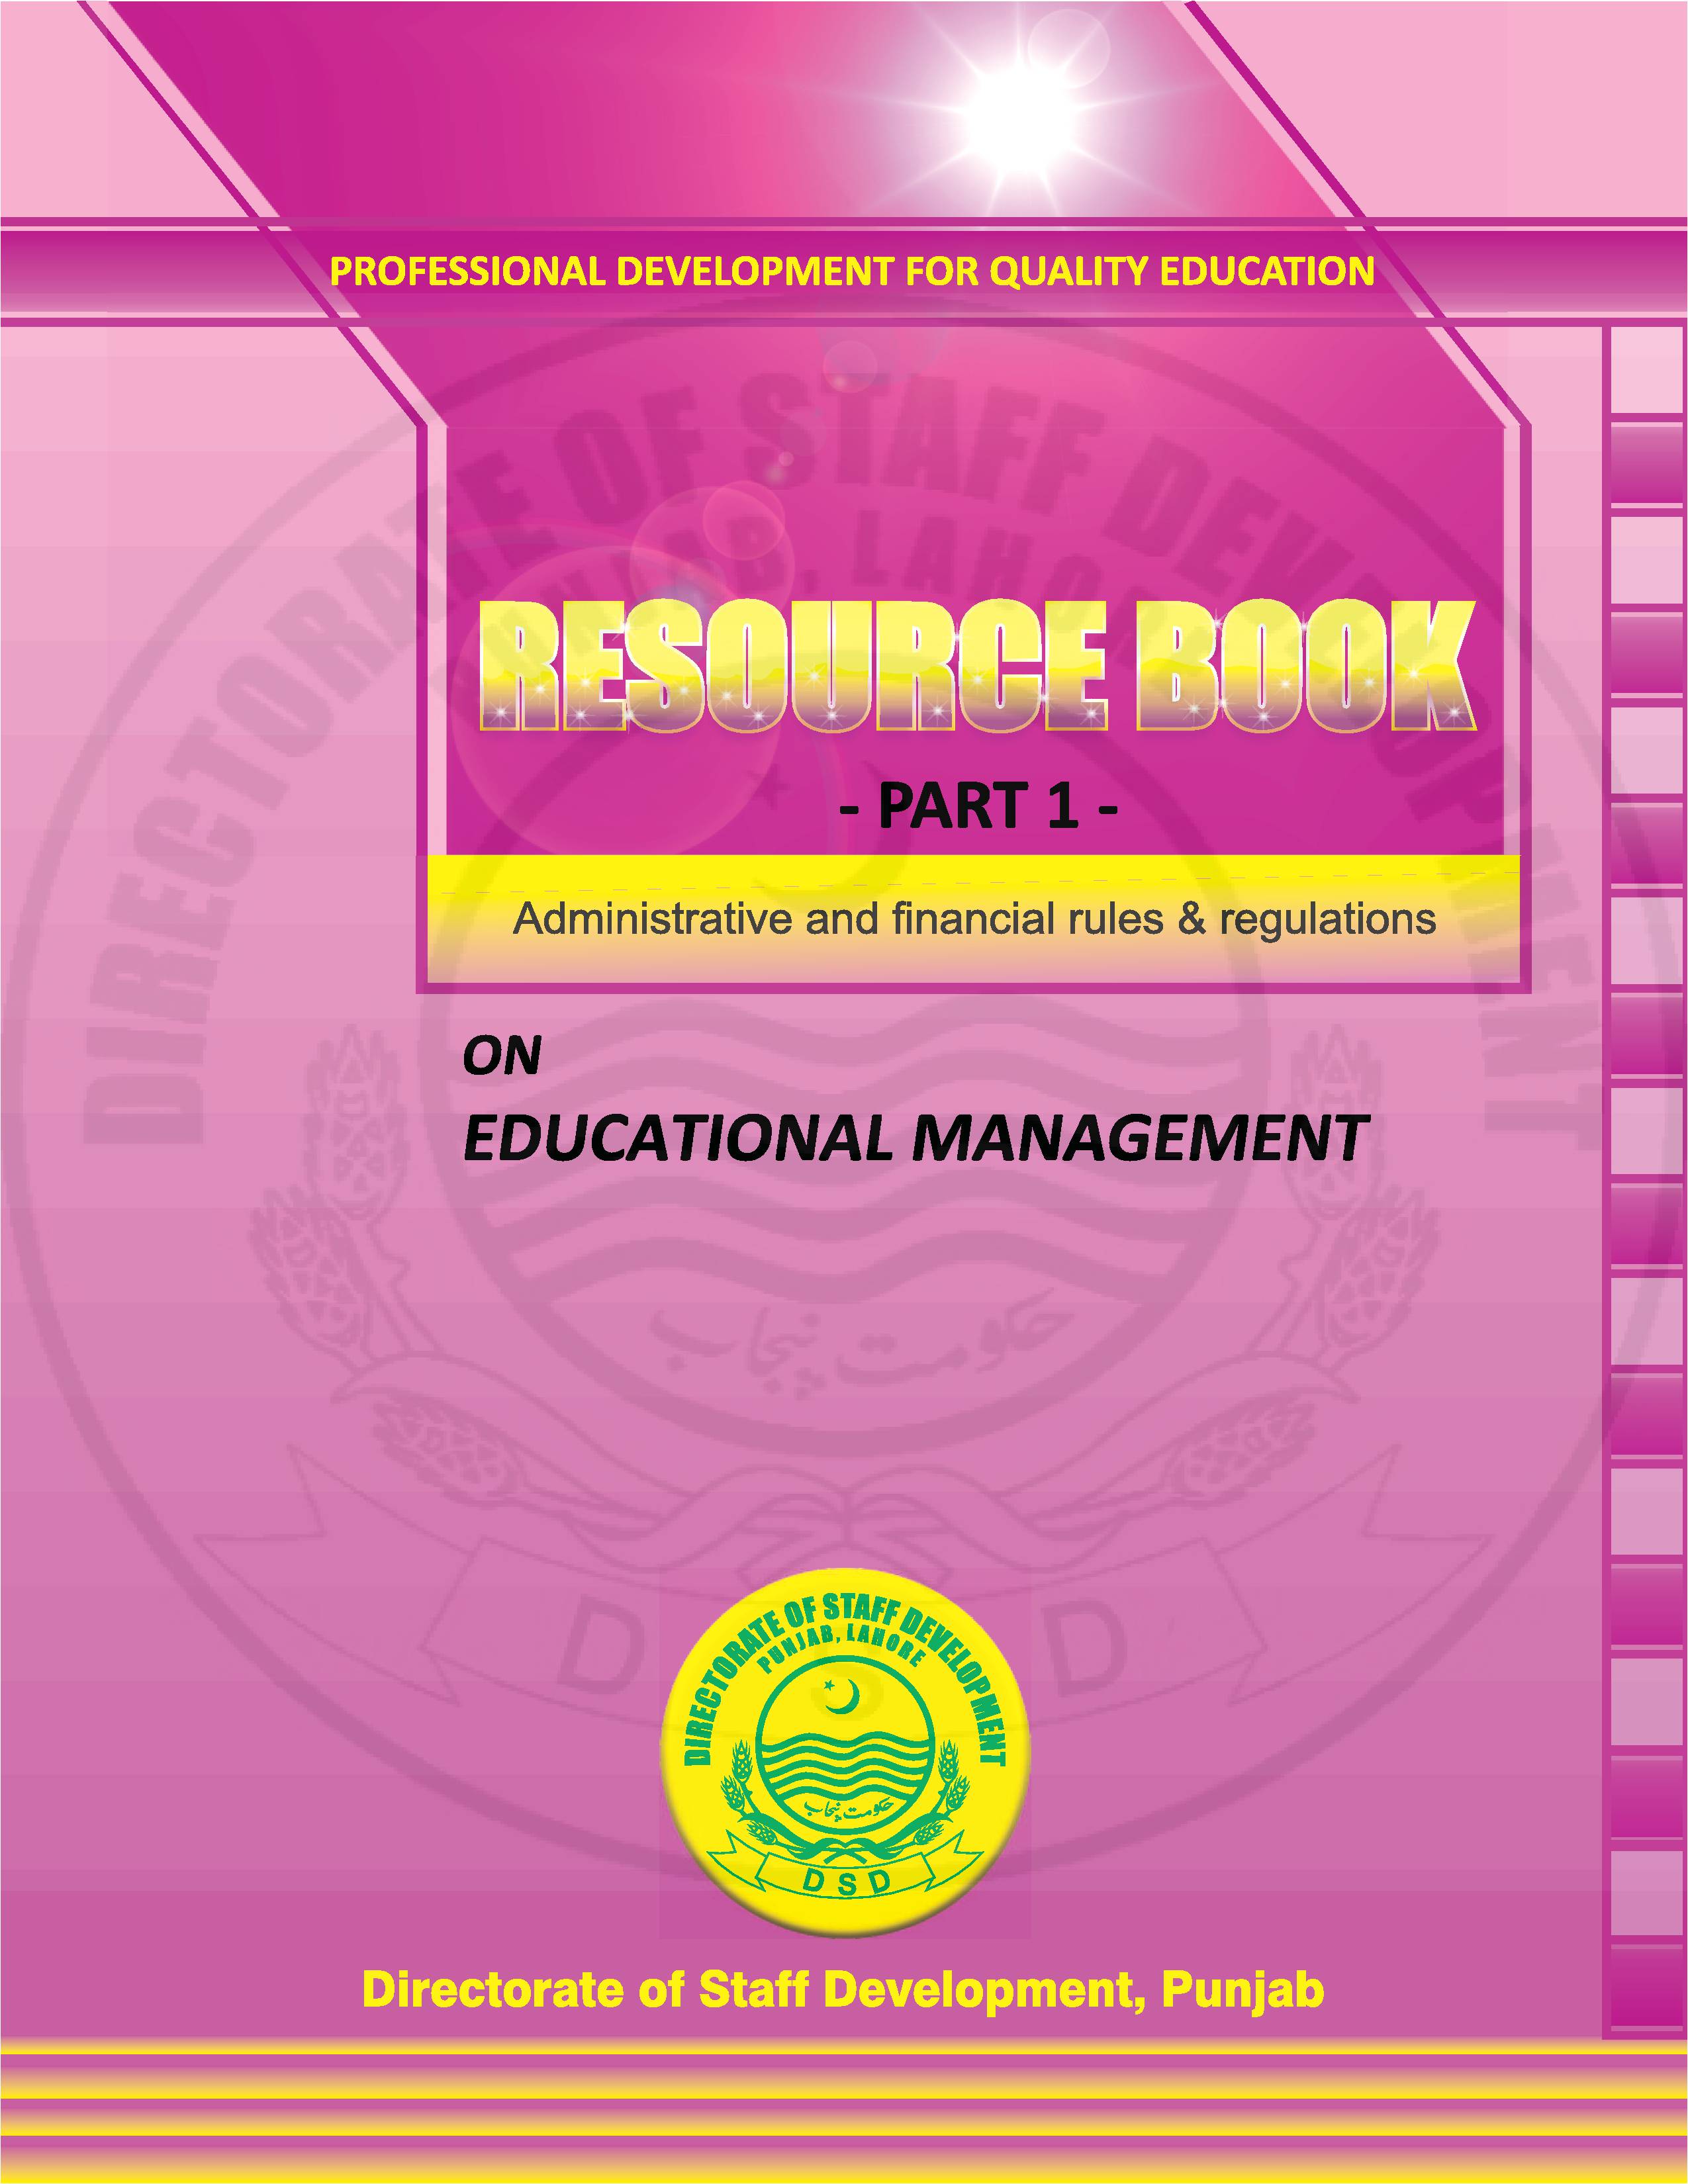 The Resource Book on educational Management